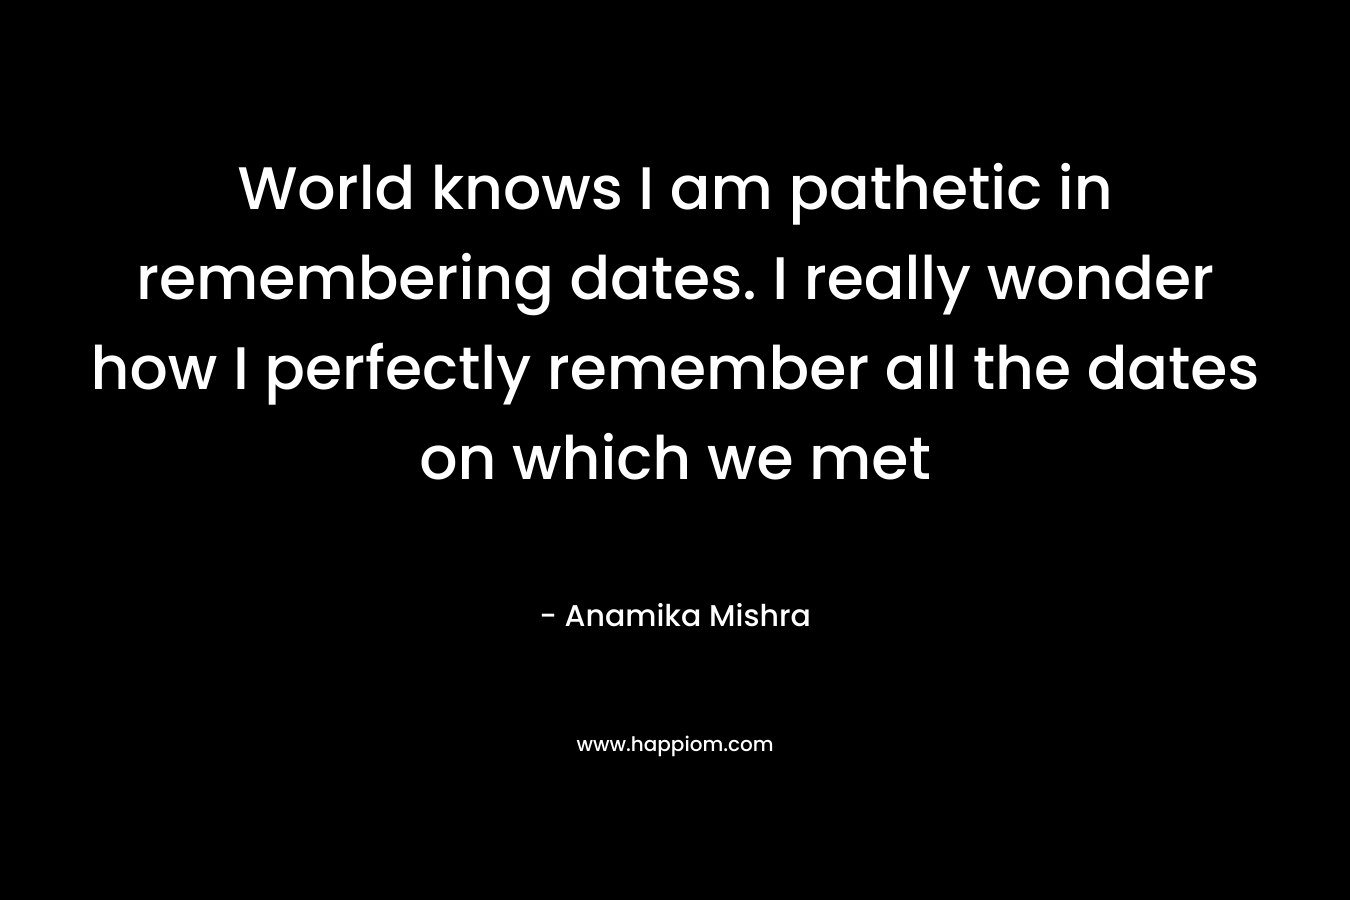 World knows I am pathetic in remembering dates. I really wonder how I perfectly remember all the dates on which we met